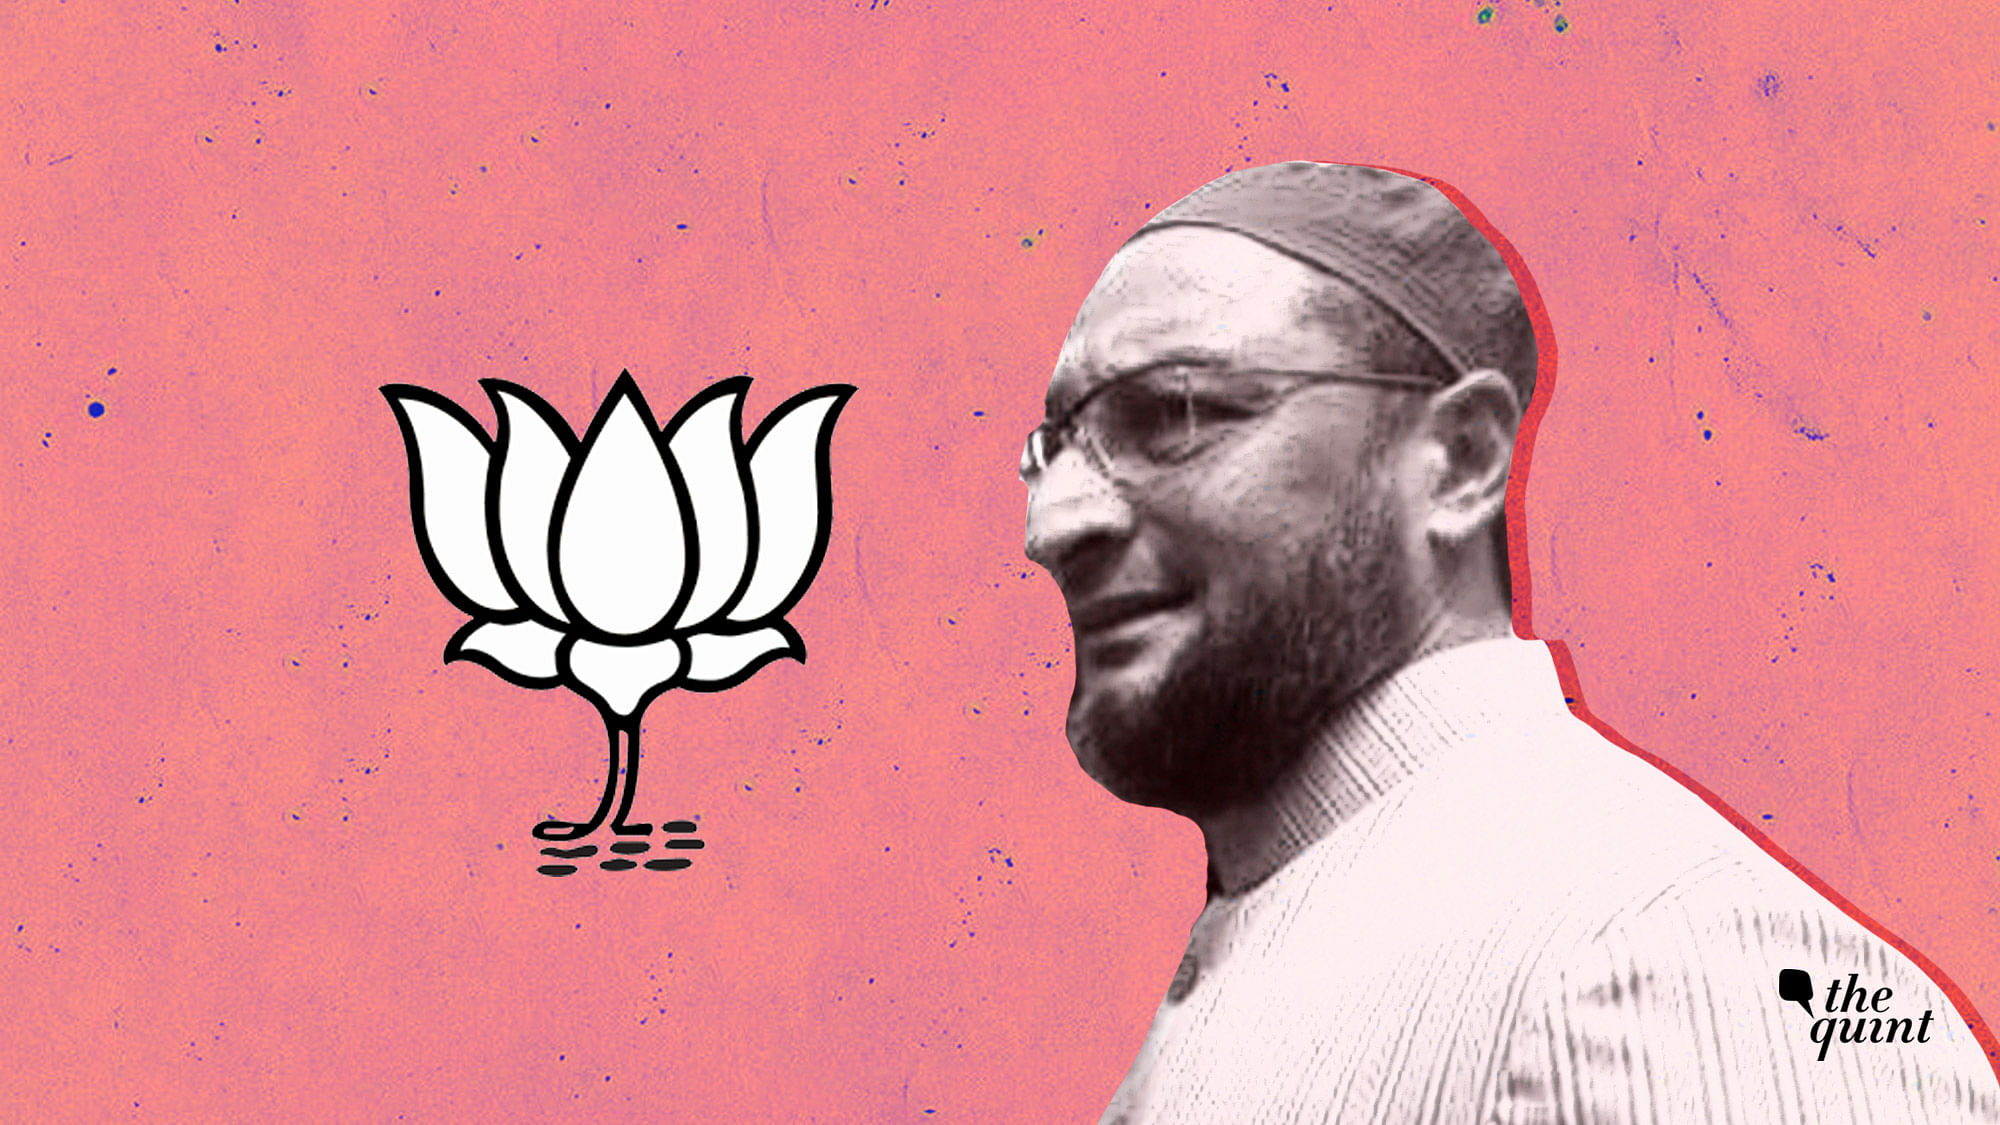 Asaduddin Owaisi, despite his unambiguous and unapologetic public postures against the BJP and its larger eco-system, serves, perhaps unwittingly, a purpose for the BJP. 